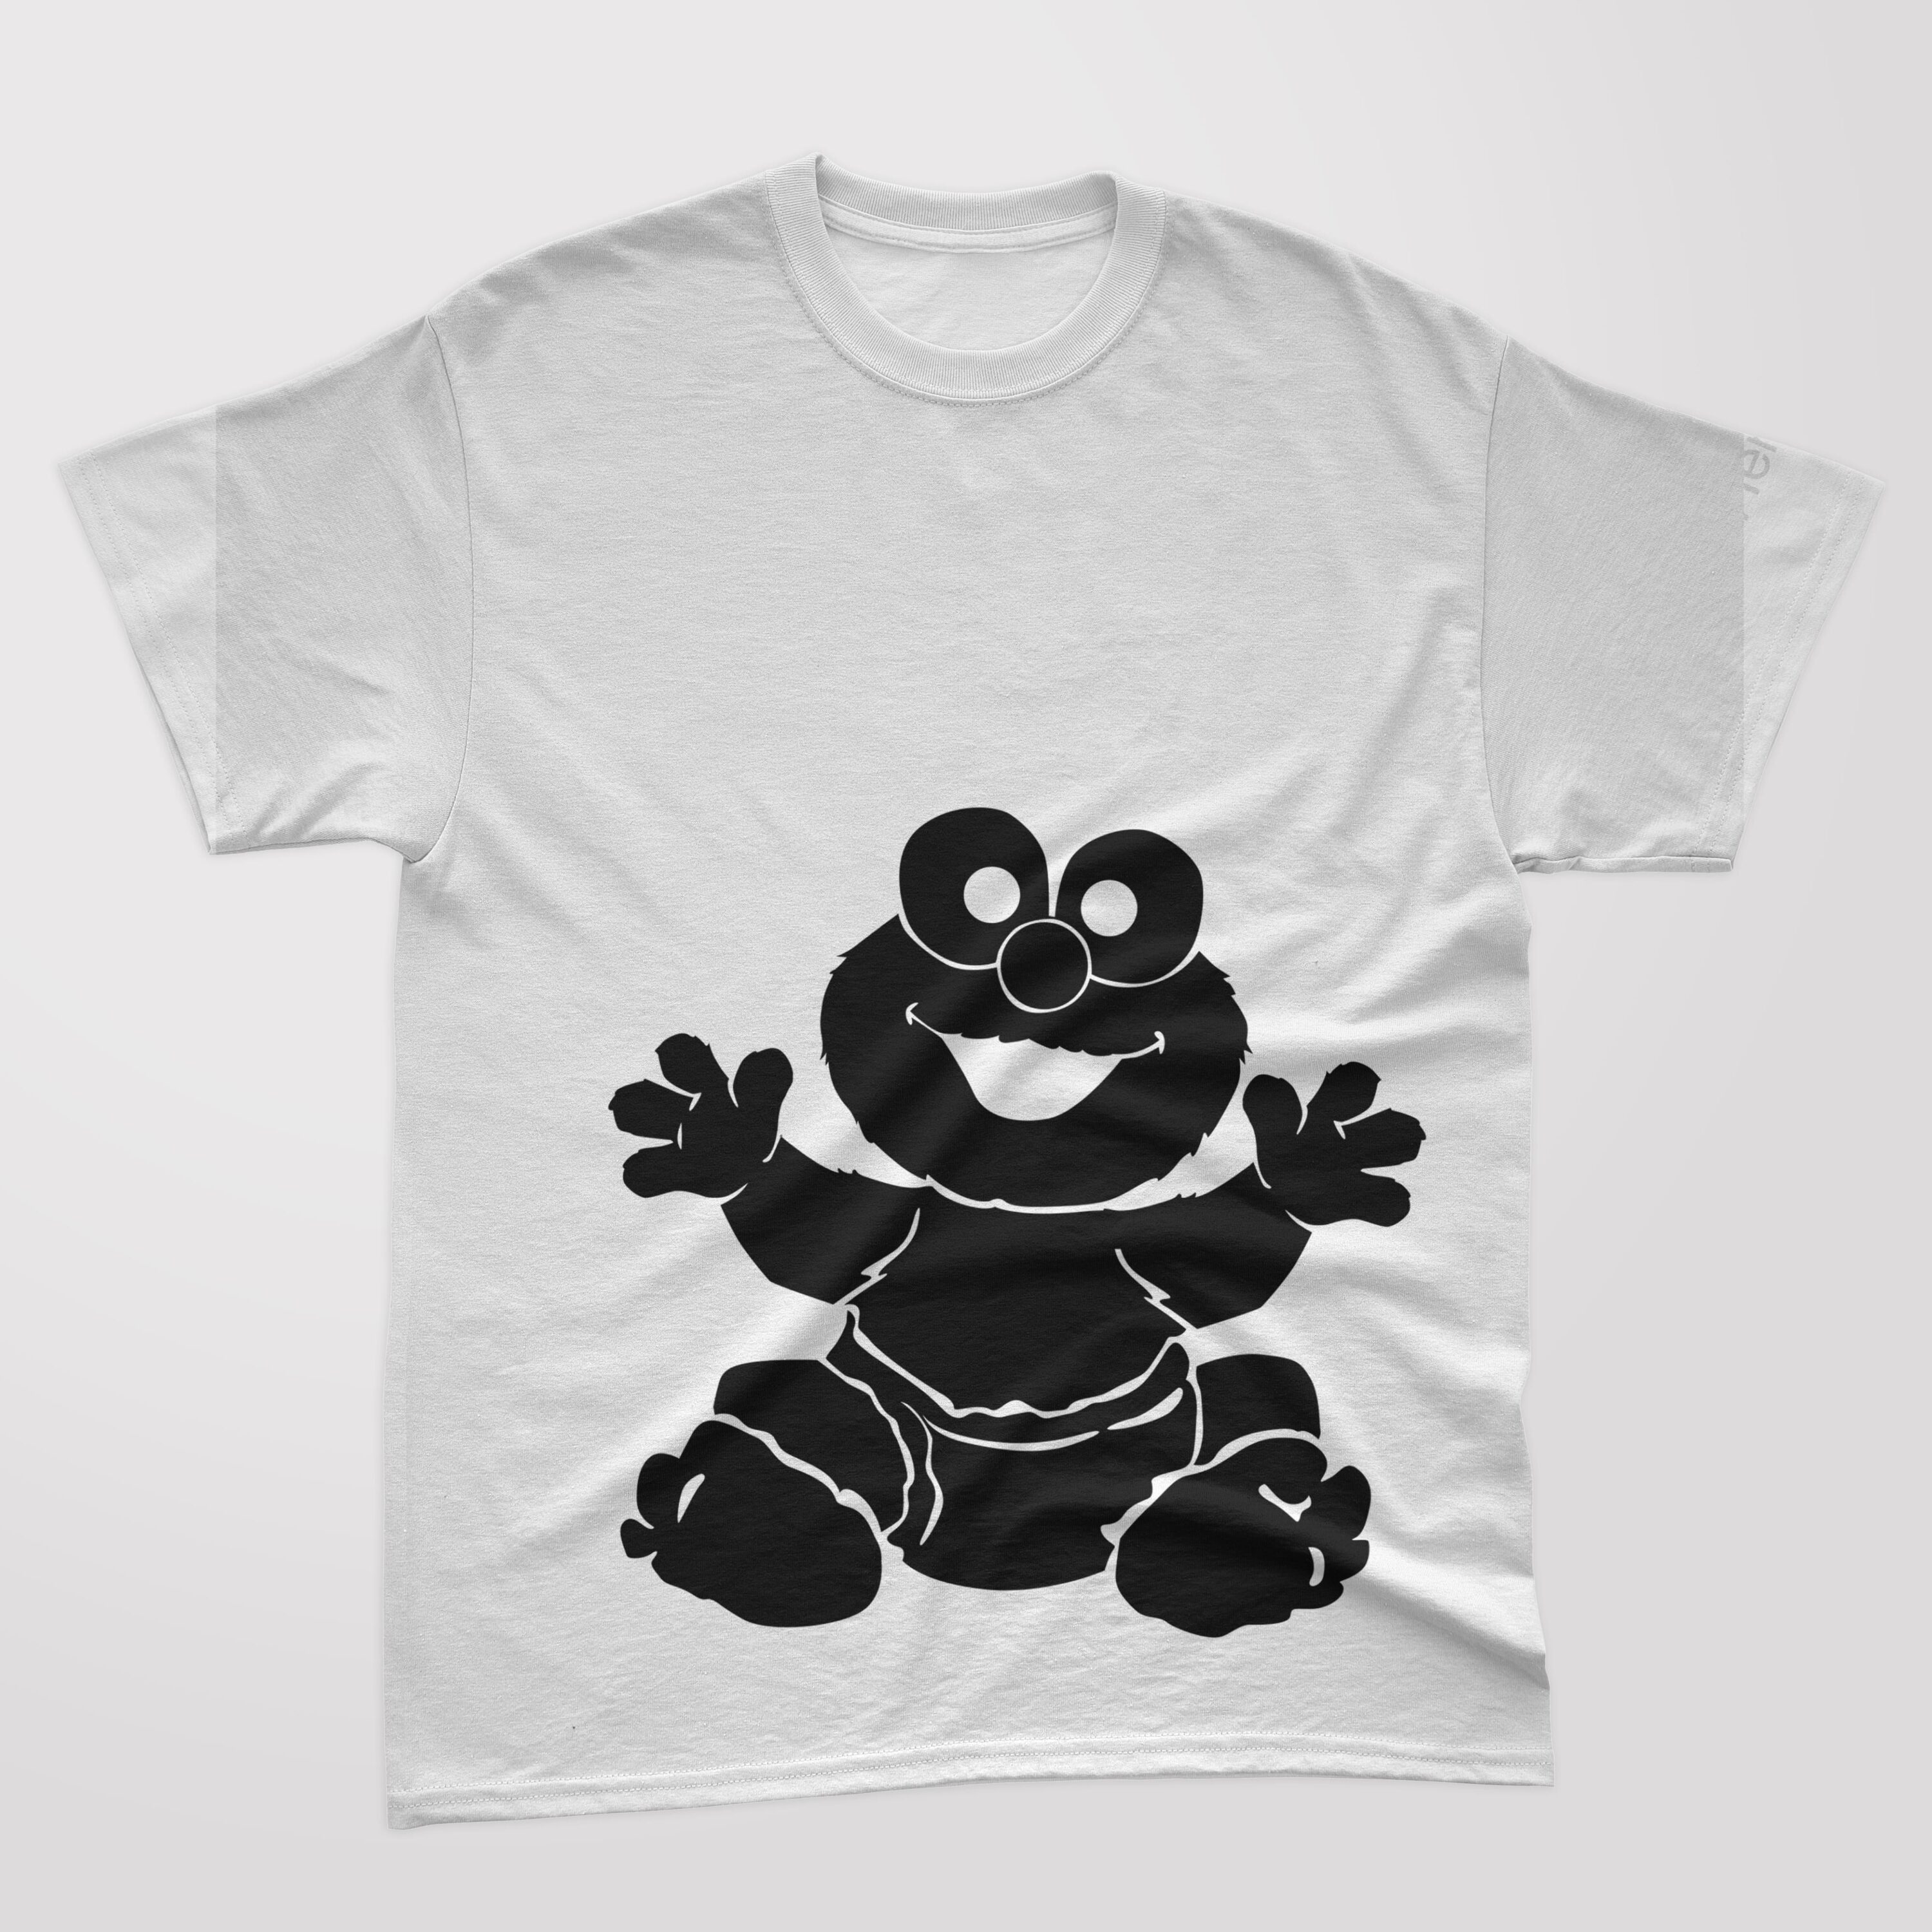 A white t-shirt with a black silhouette baby cookie monster.